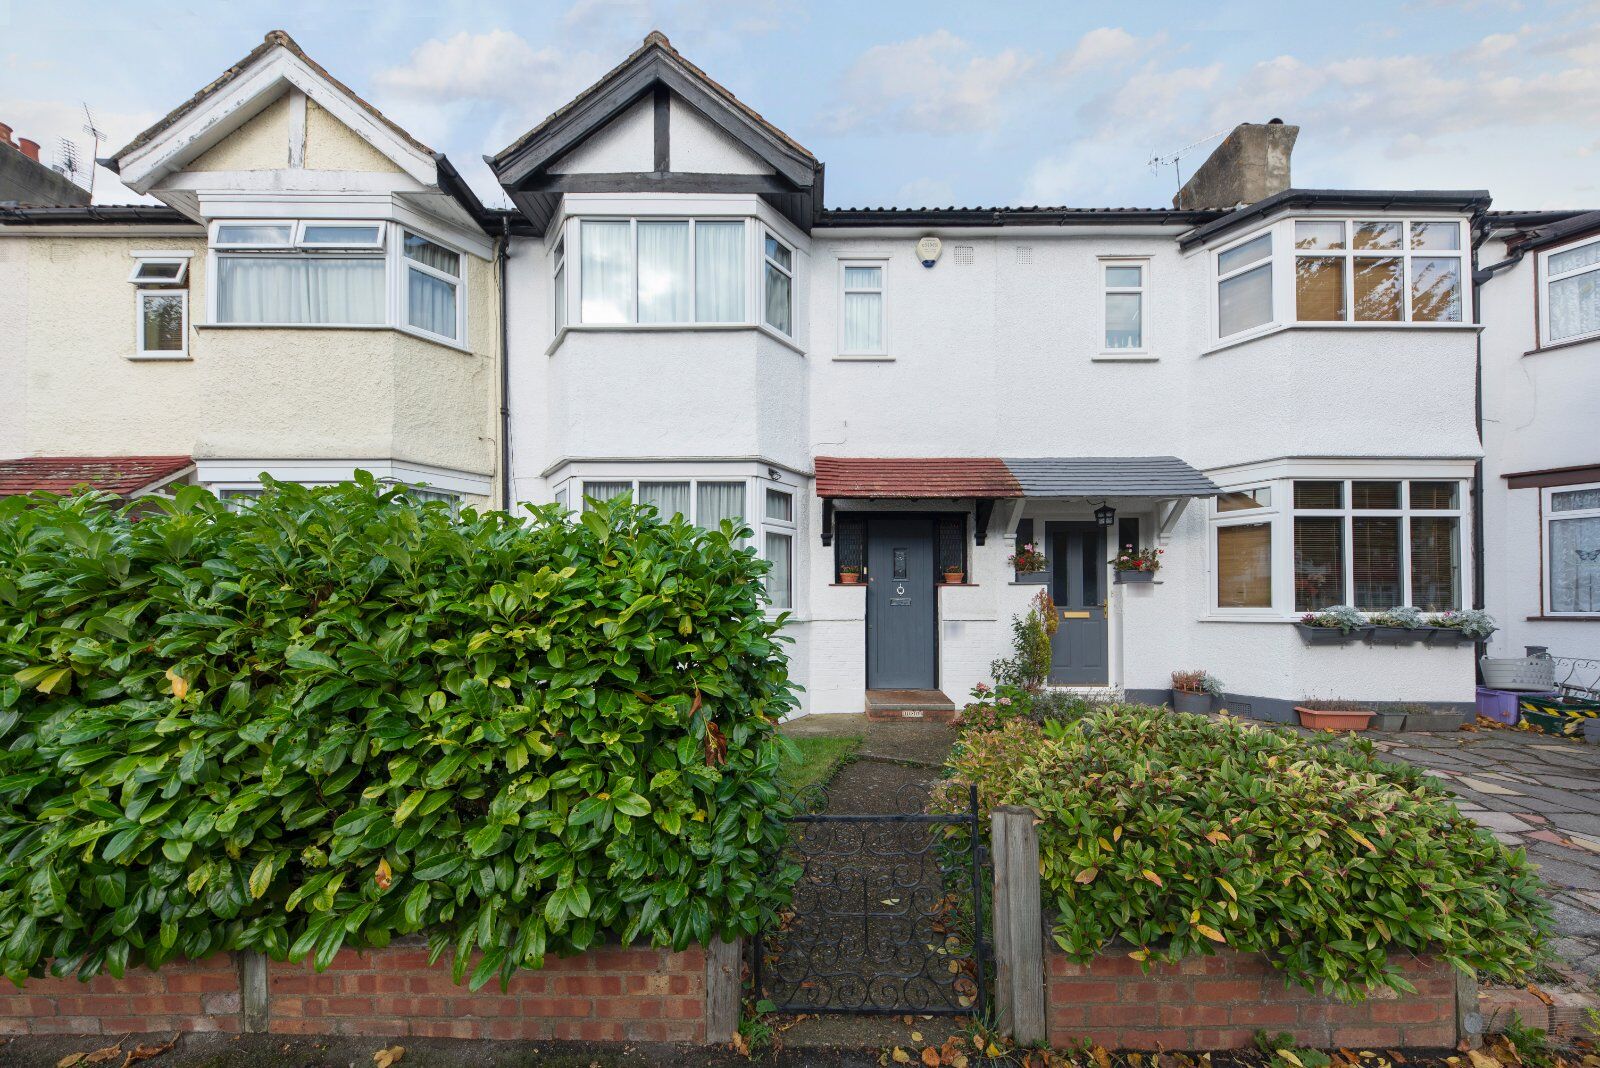 3 bedroom mid terraced house for sale Phyllis Avenue, New Malden, KT3, main image